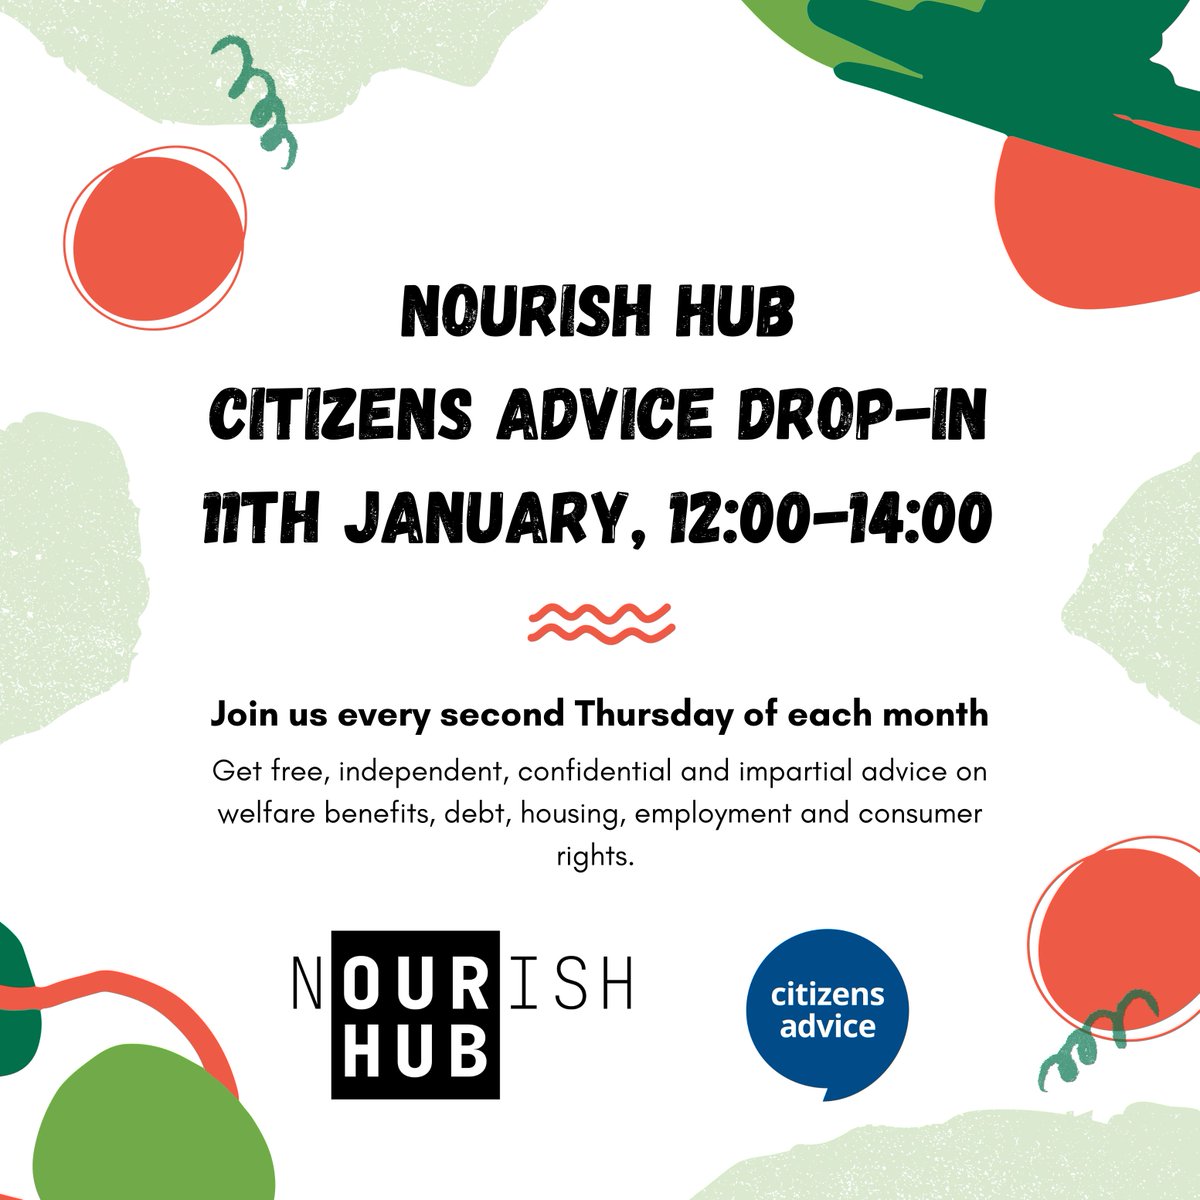 We are partnering with @citizensadvicehf on the second Thursday of every month.Please join us for free, impartial and confidential advice on your rights and responsibilities. In particular, we offer advice on welfare benefits, debt, housing, employment and consumer rights 💚